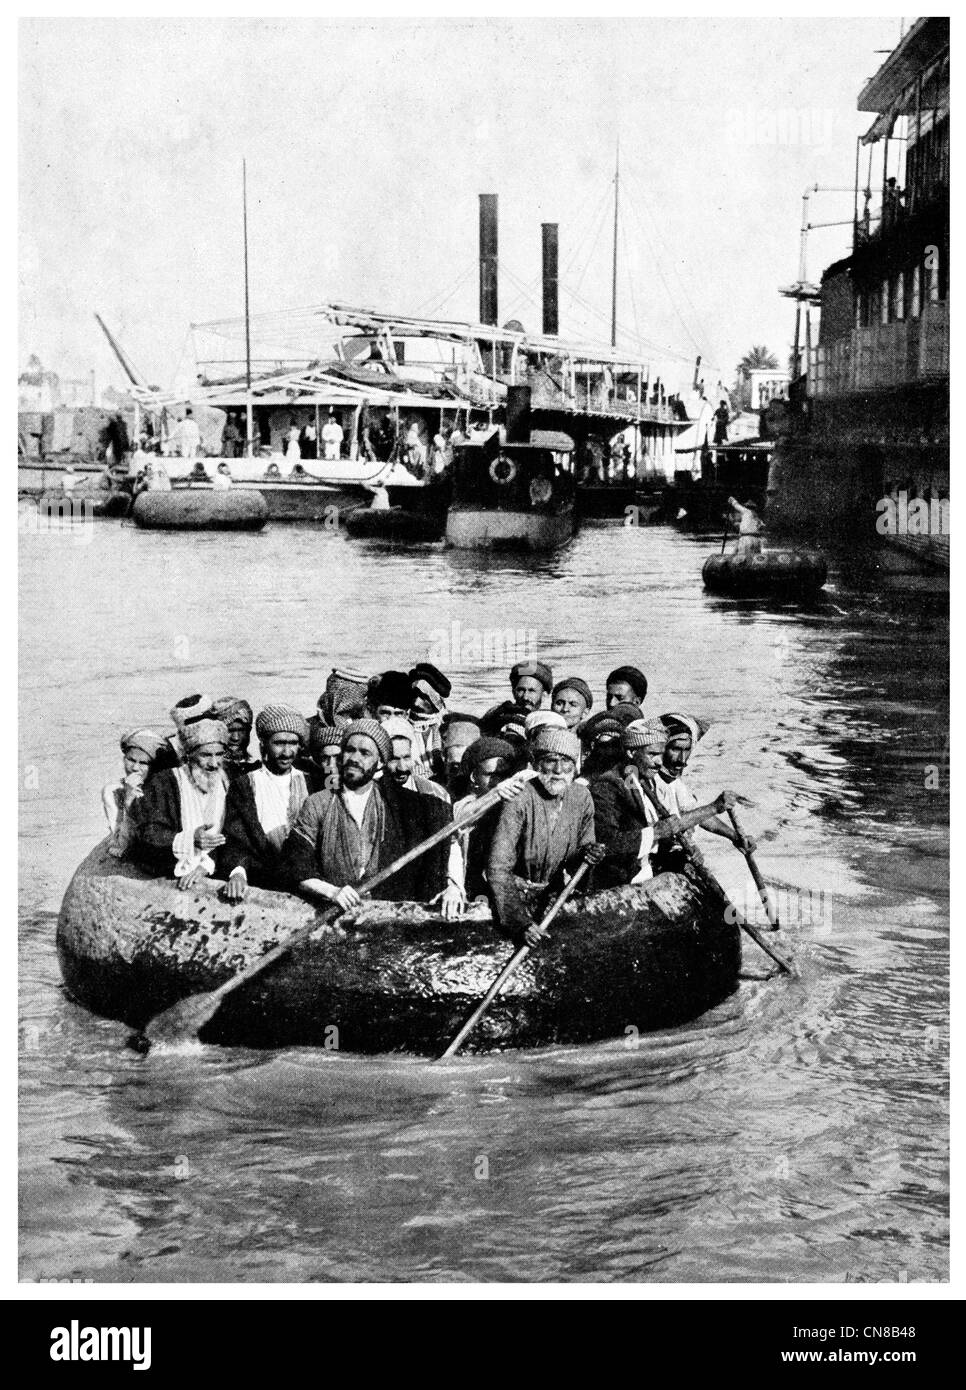 First published 1914  Steam ship goofah boat basket coracle Baghdad ferry Stock Photo